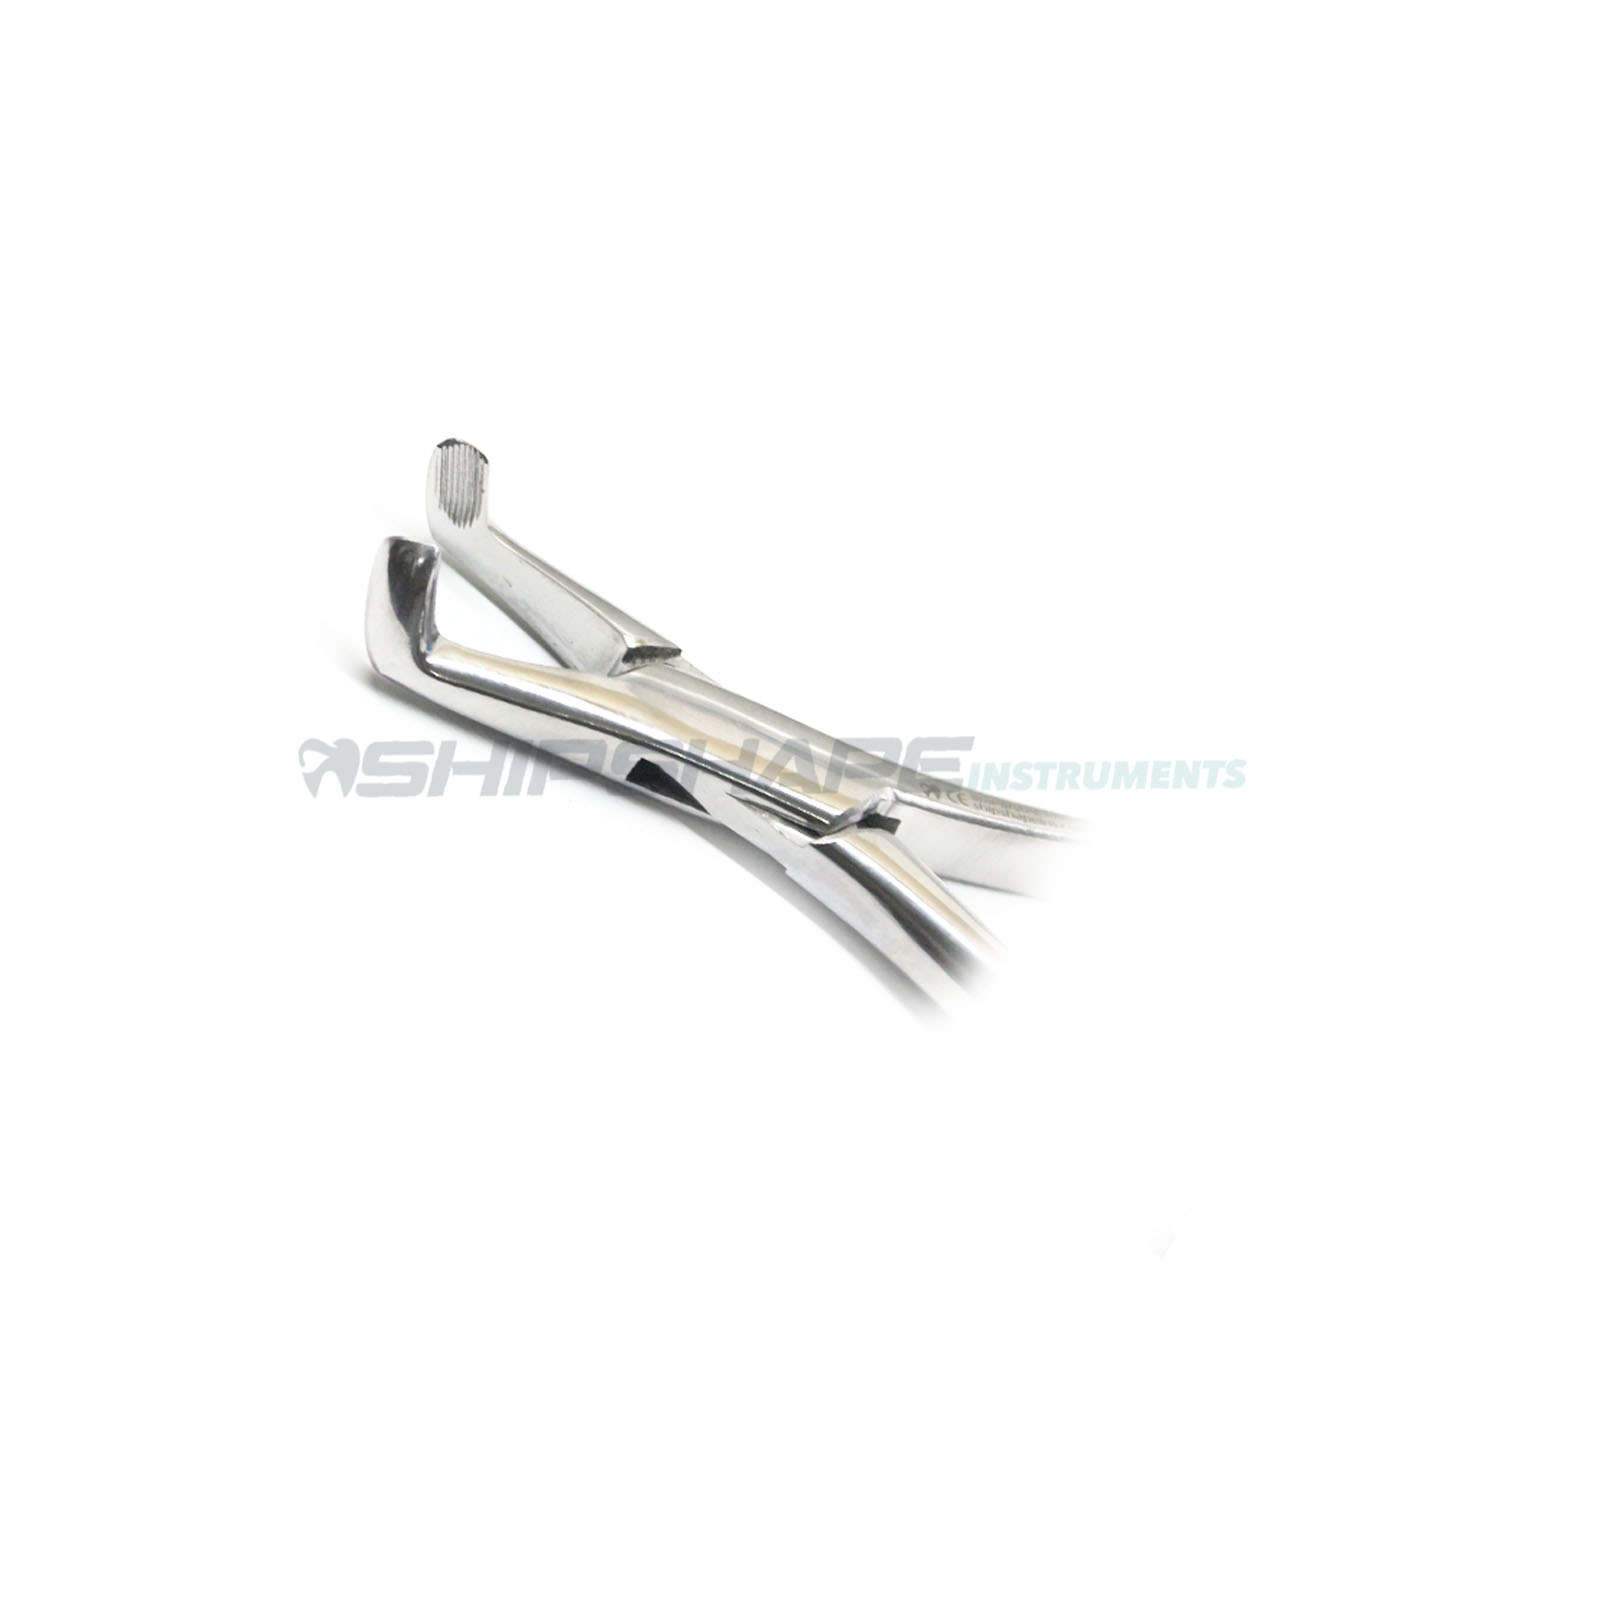 Tooth Extracting Forceps # 222 Predictable Dental Oral Extraction Procedure Tool | Shipshape Instruments-1585